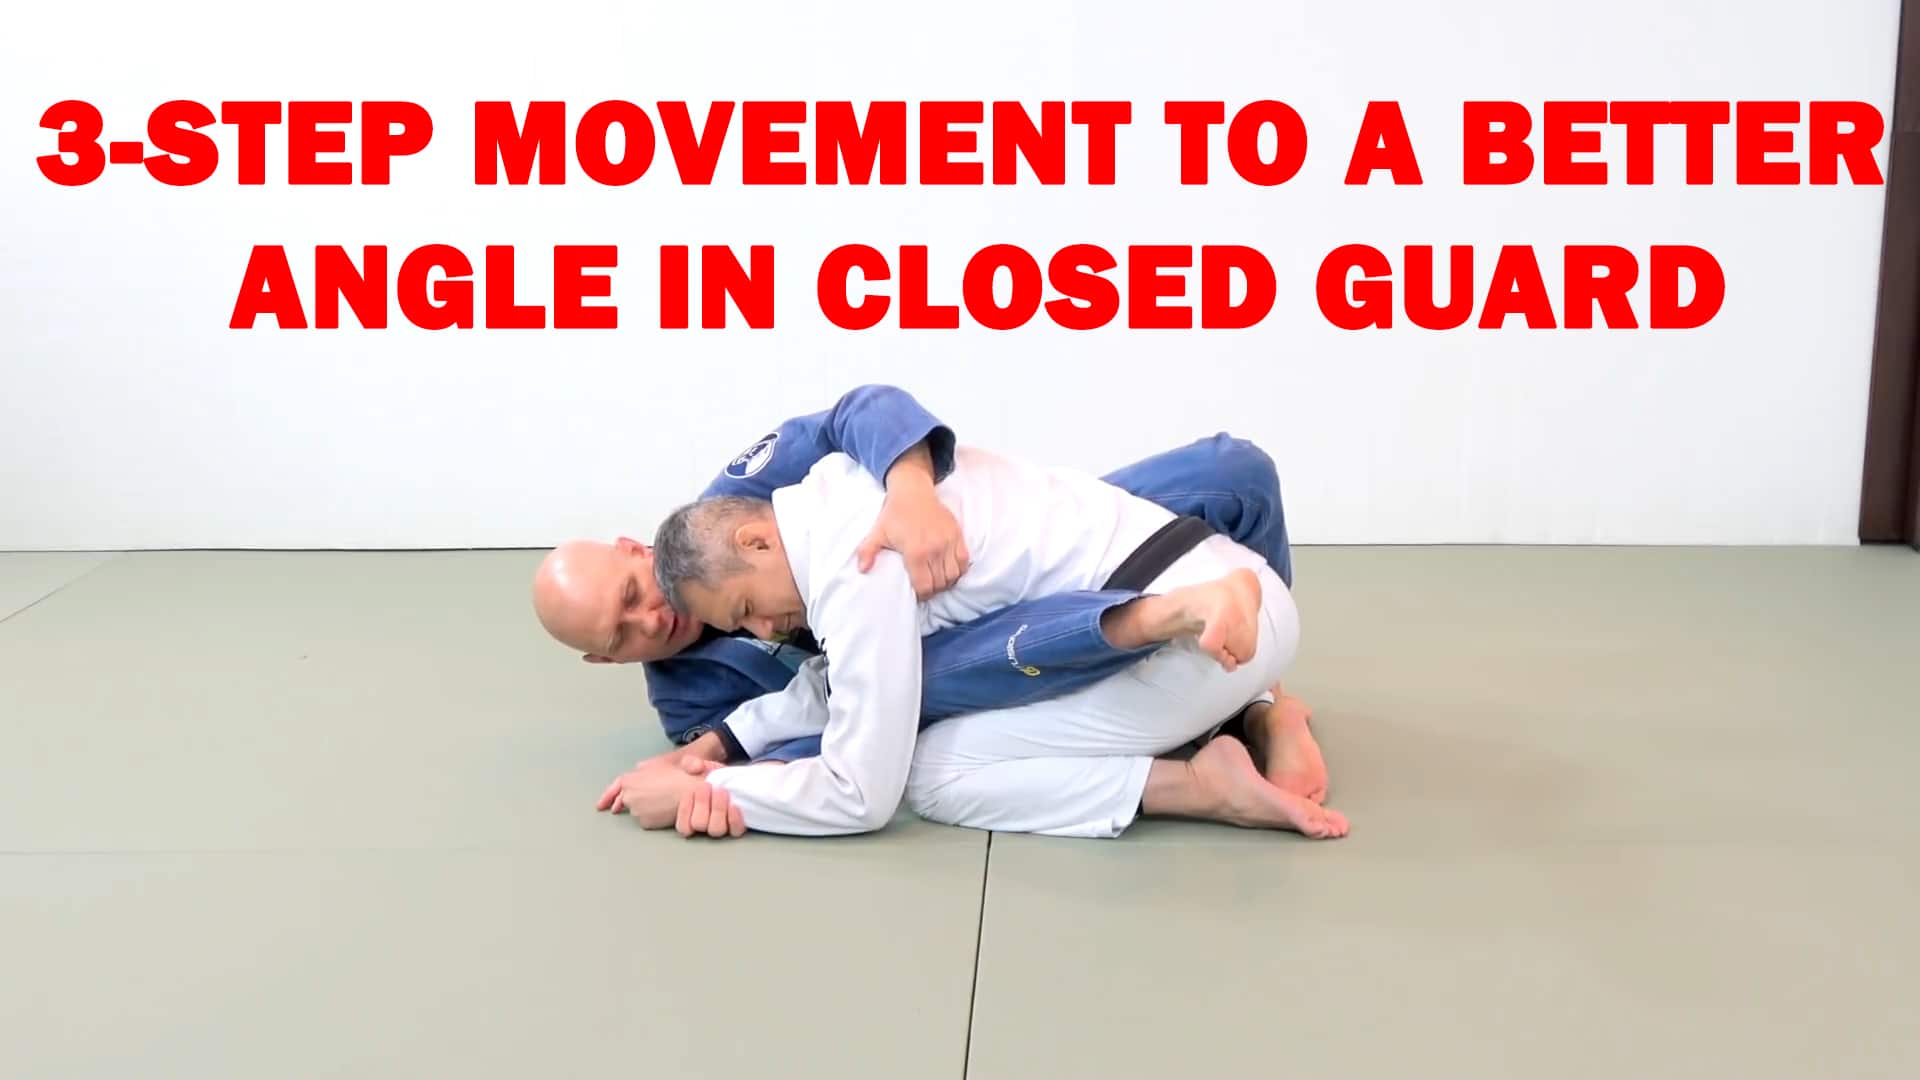 making angles in closed guard